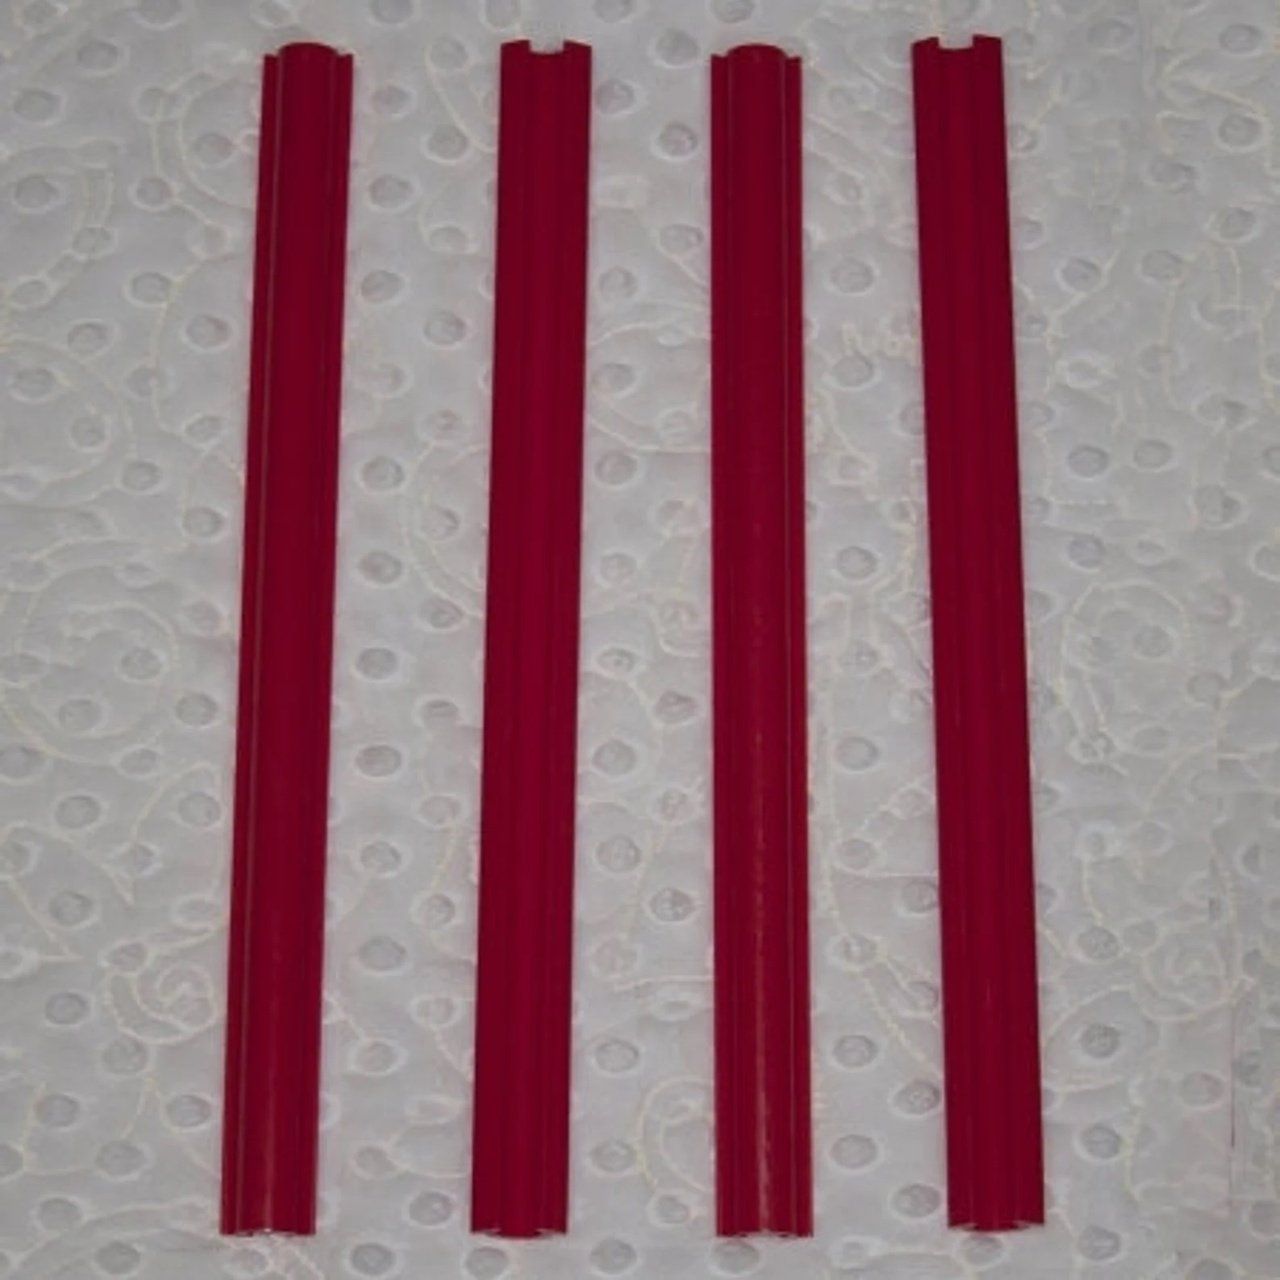 Extra Red Snapper Clamp Sets